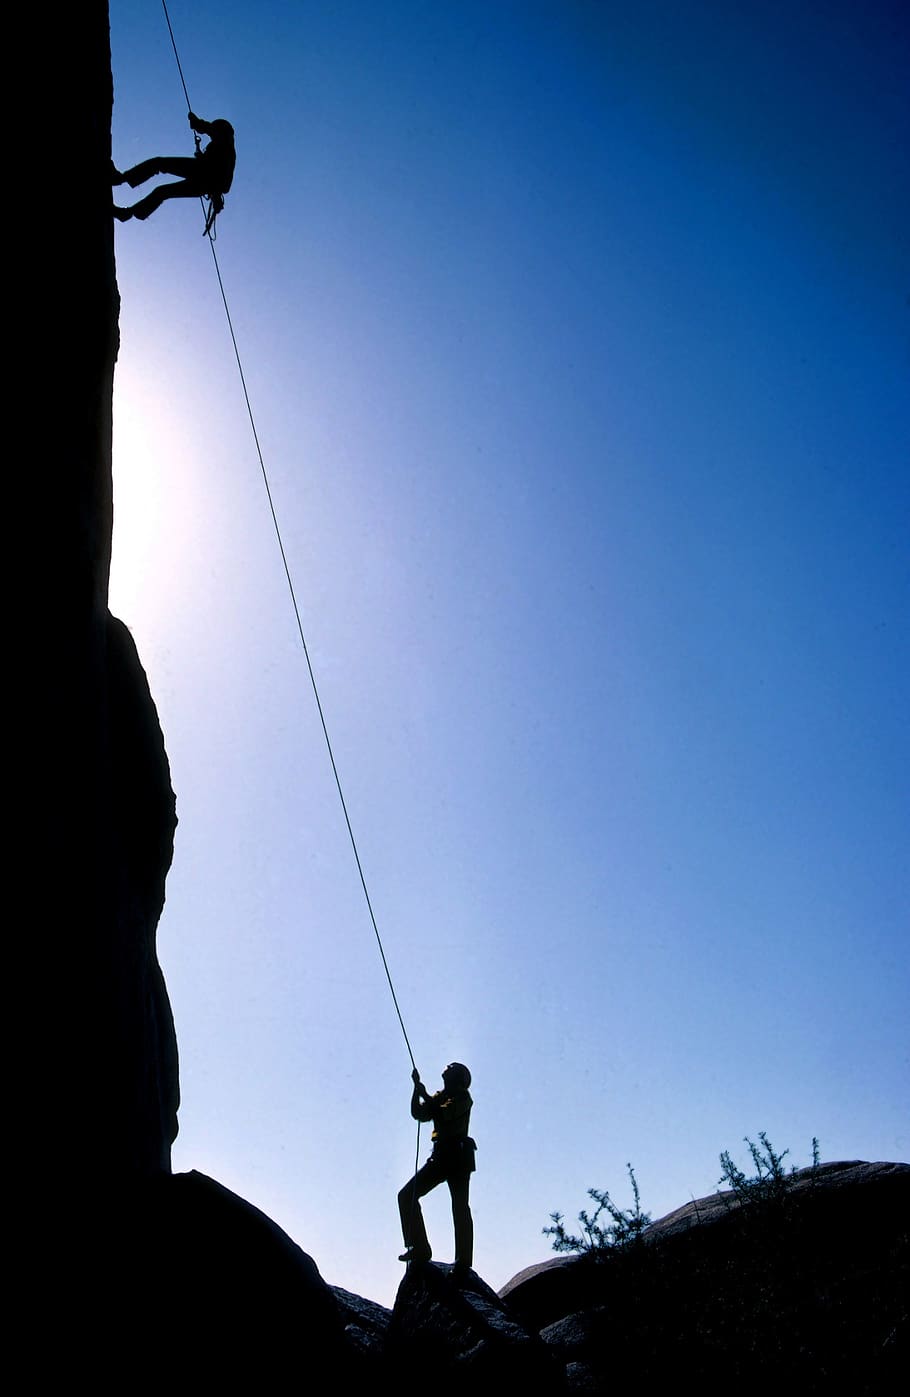 Mountain Climbing Silhouette, action, adventure, backlit, challenge